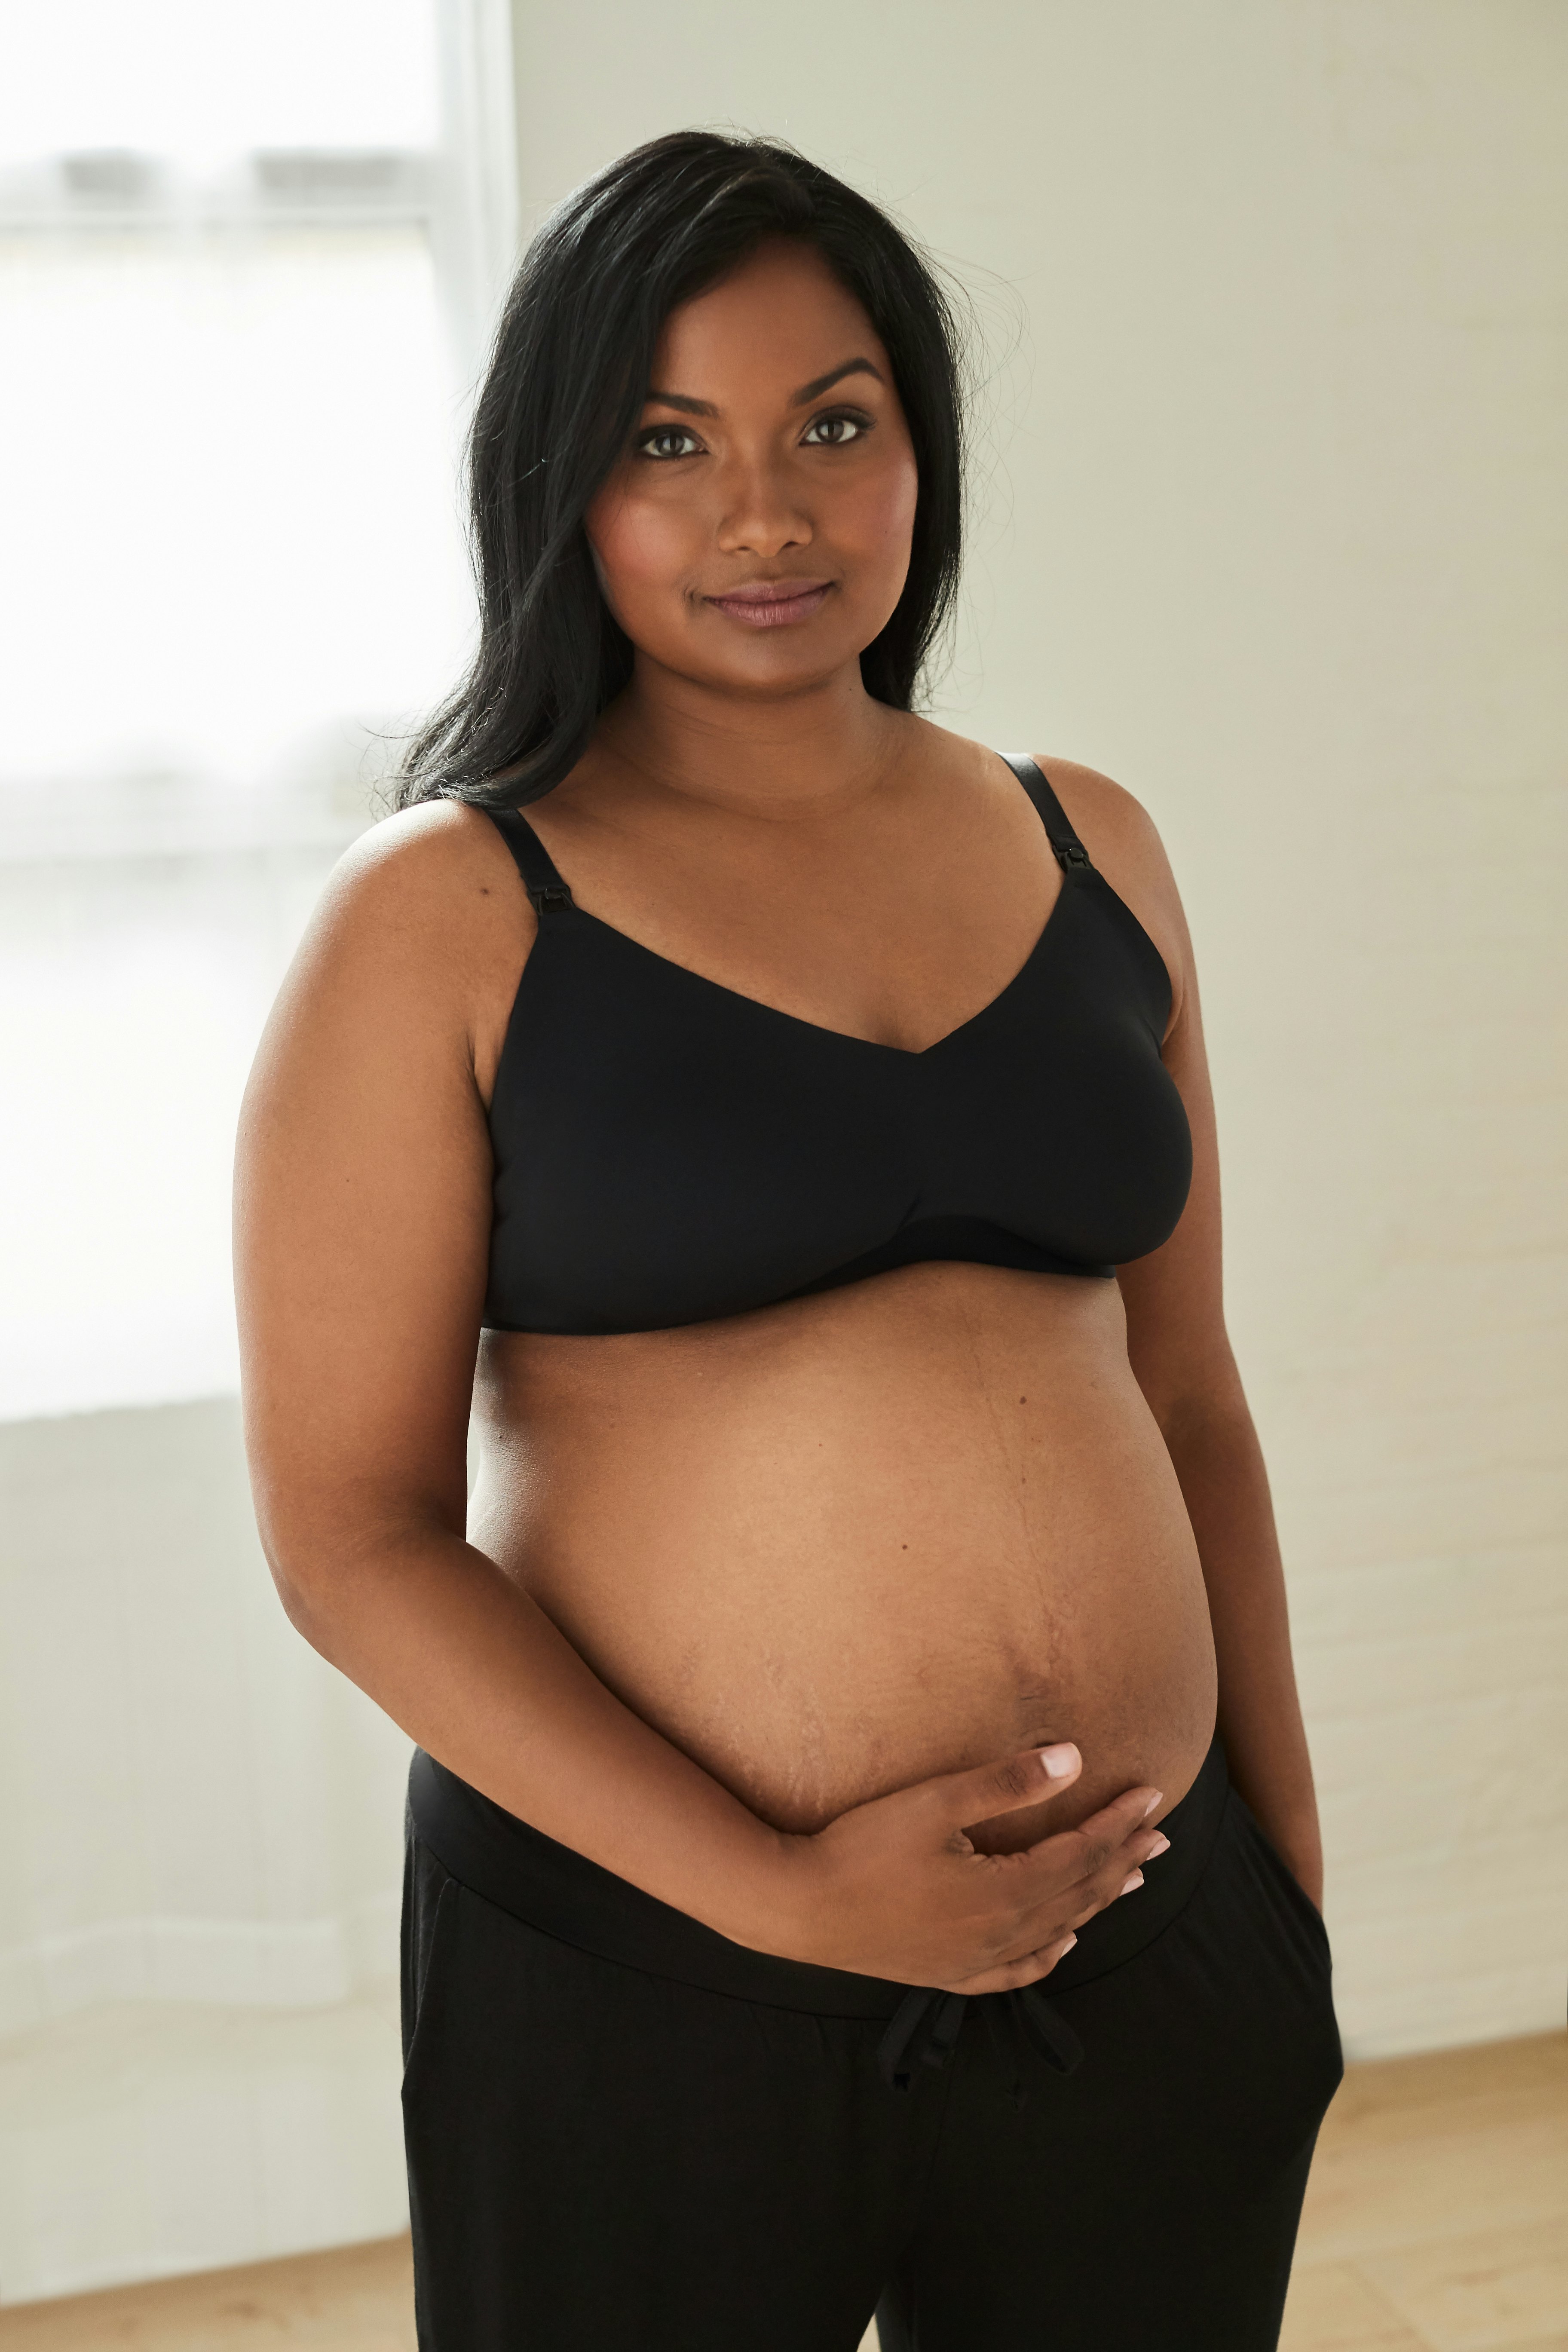 The New Knix Maternity Line Combines Comfort & Convenience